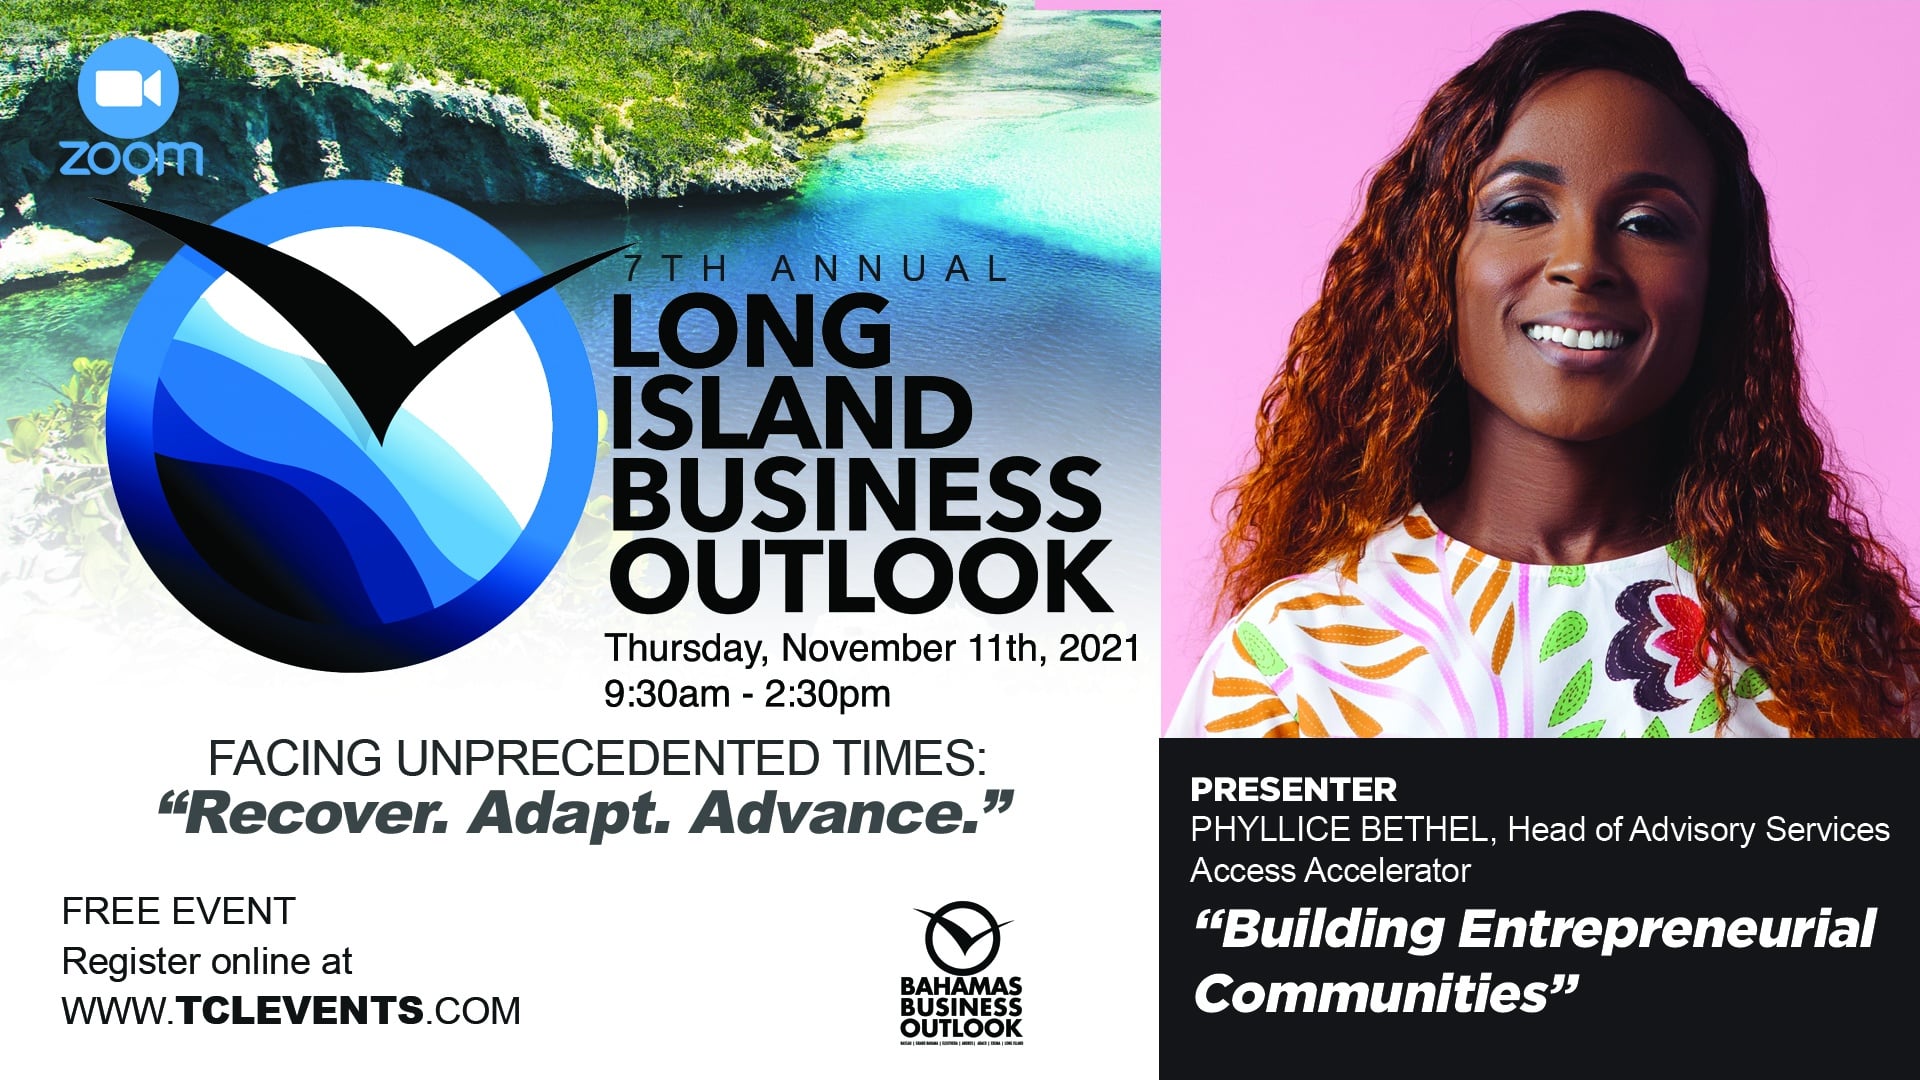 Long Island Business Outlook promotional graphic flier